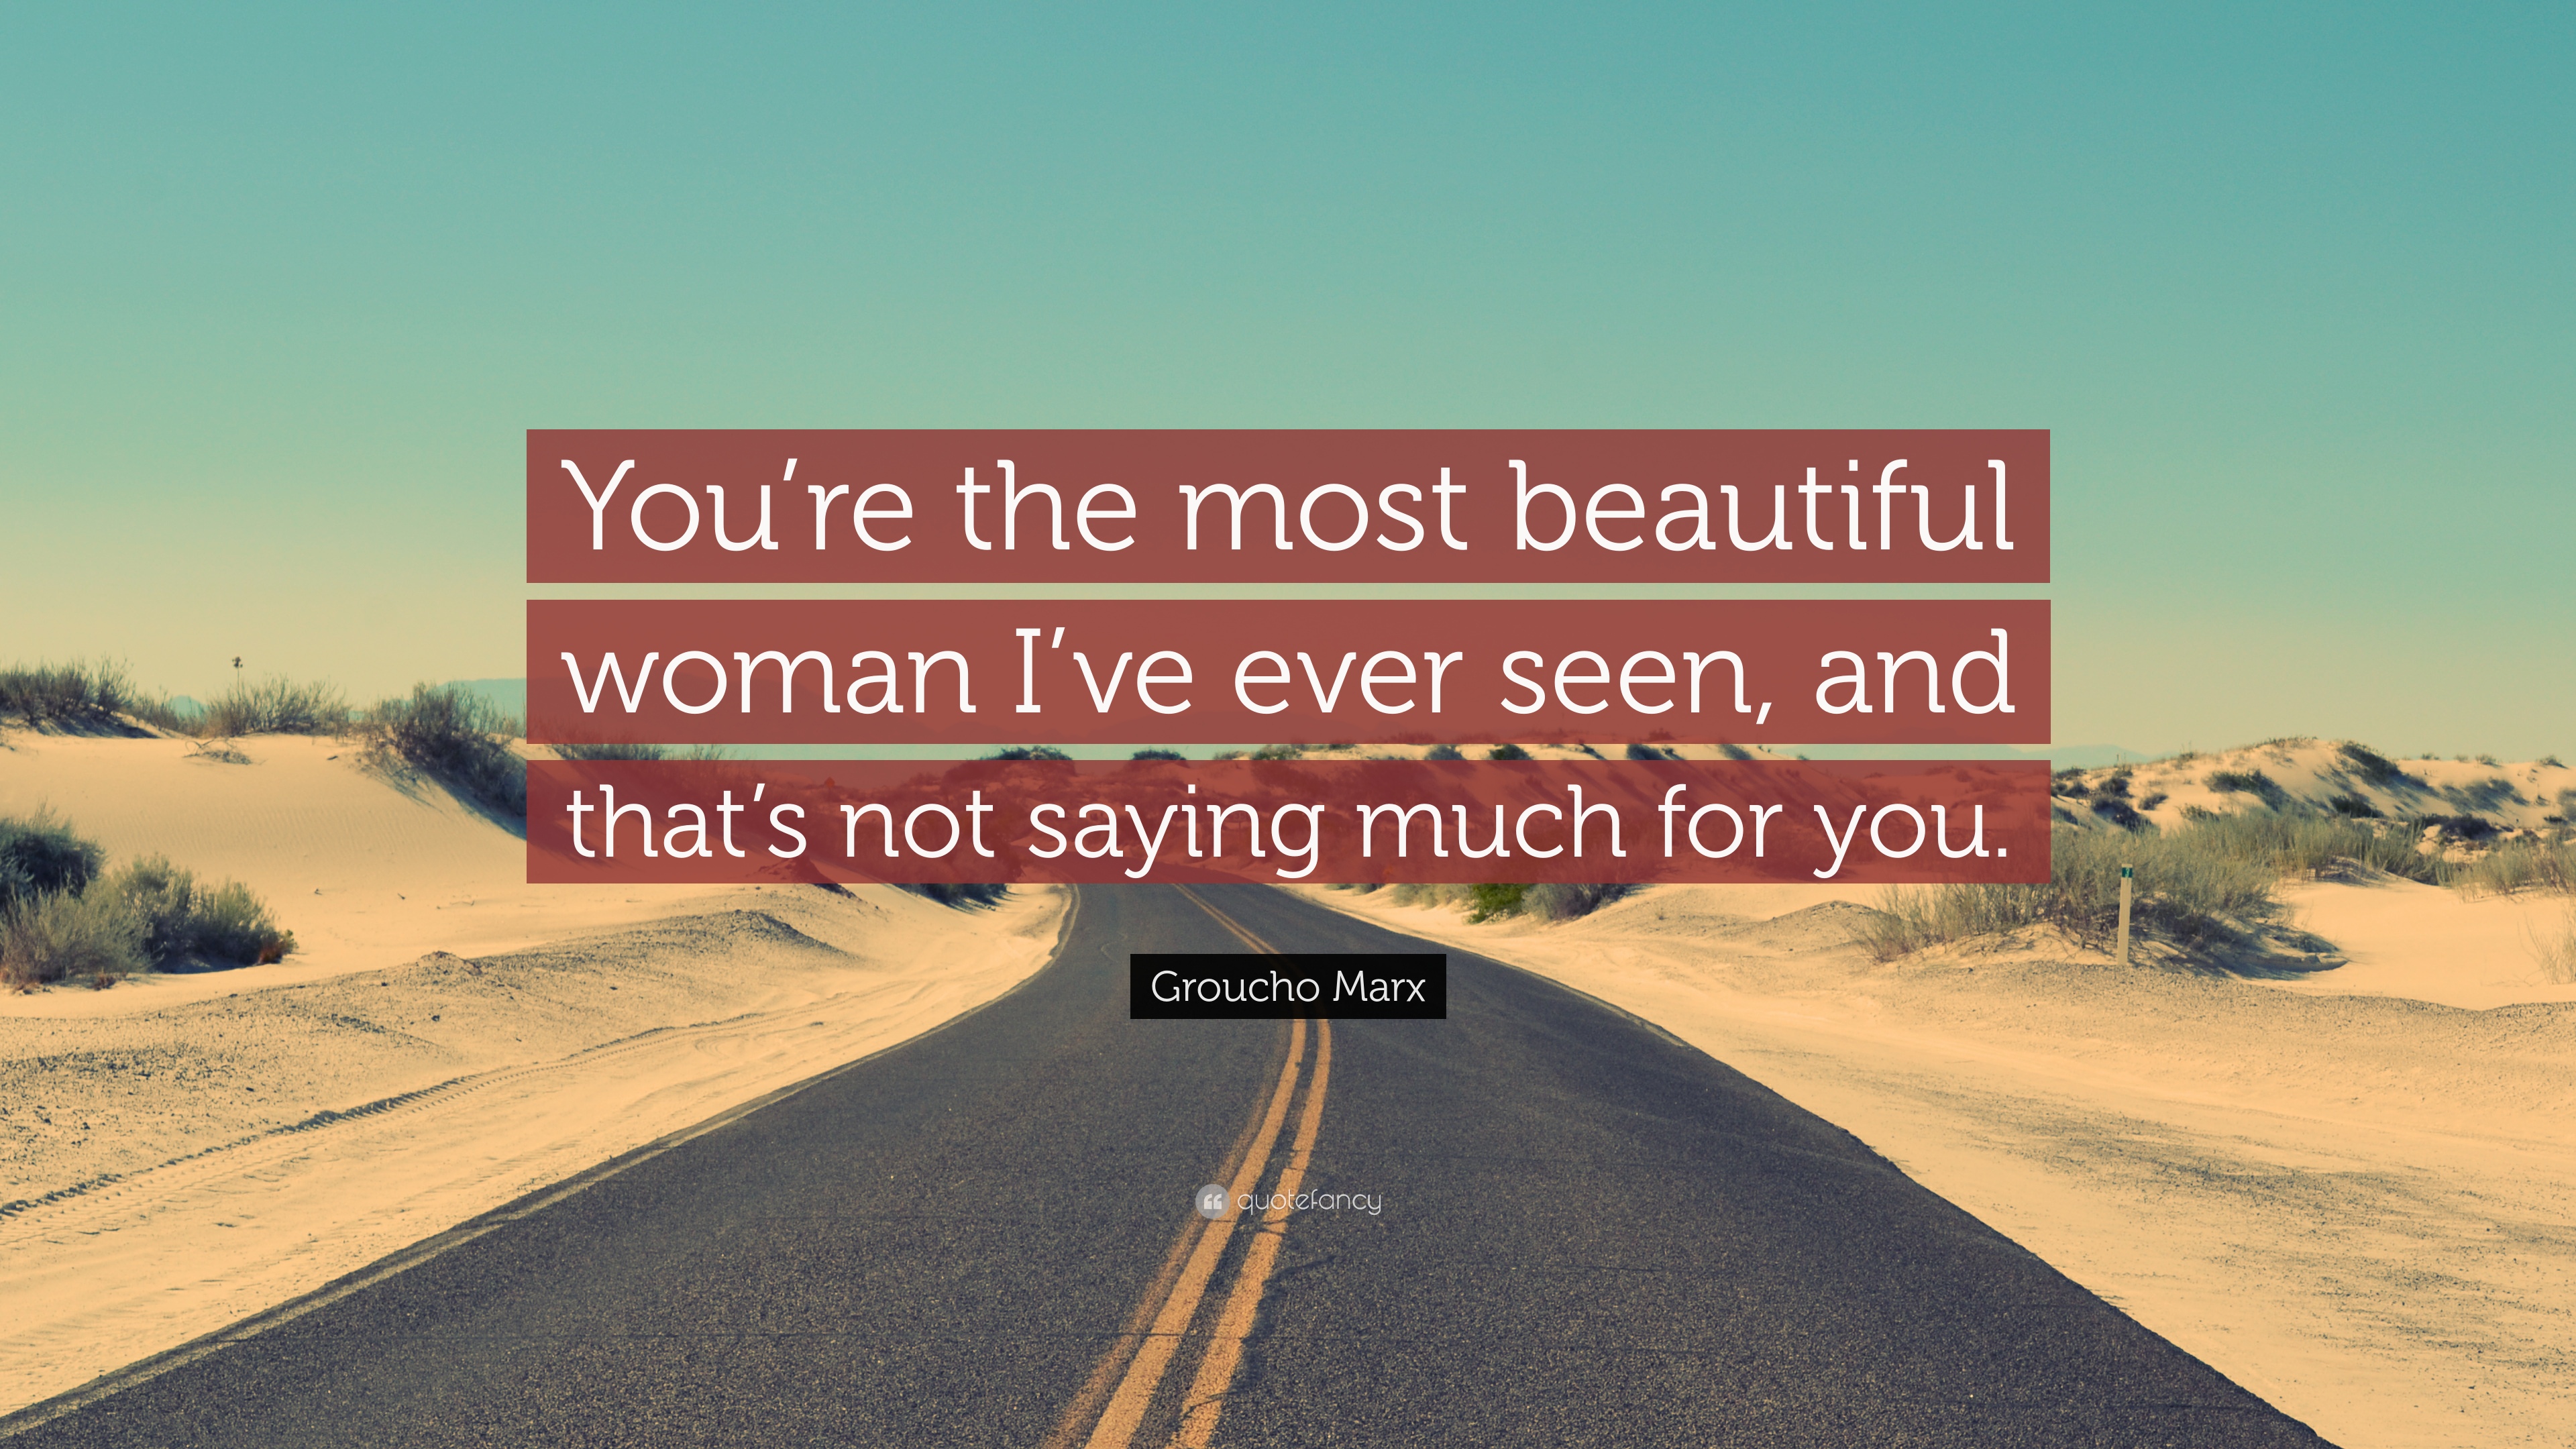 Groucho Marx Quote: “You're the most beautiful woman I've ever seen